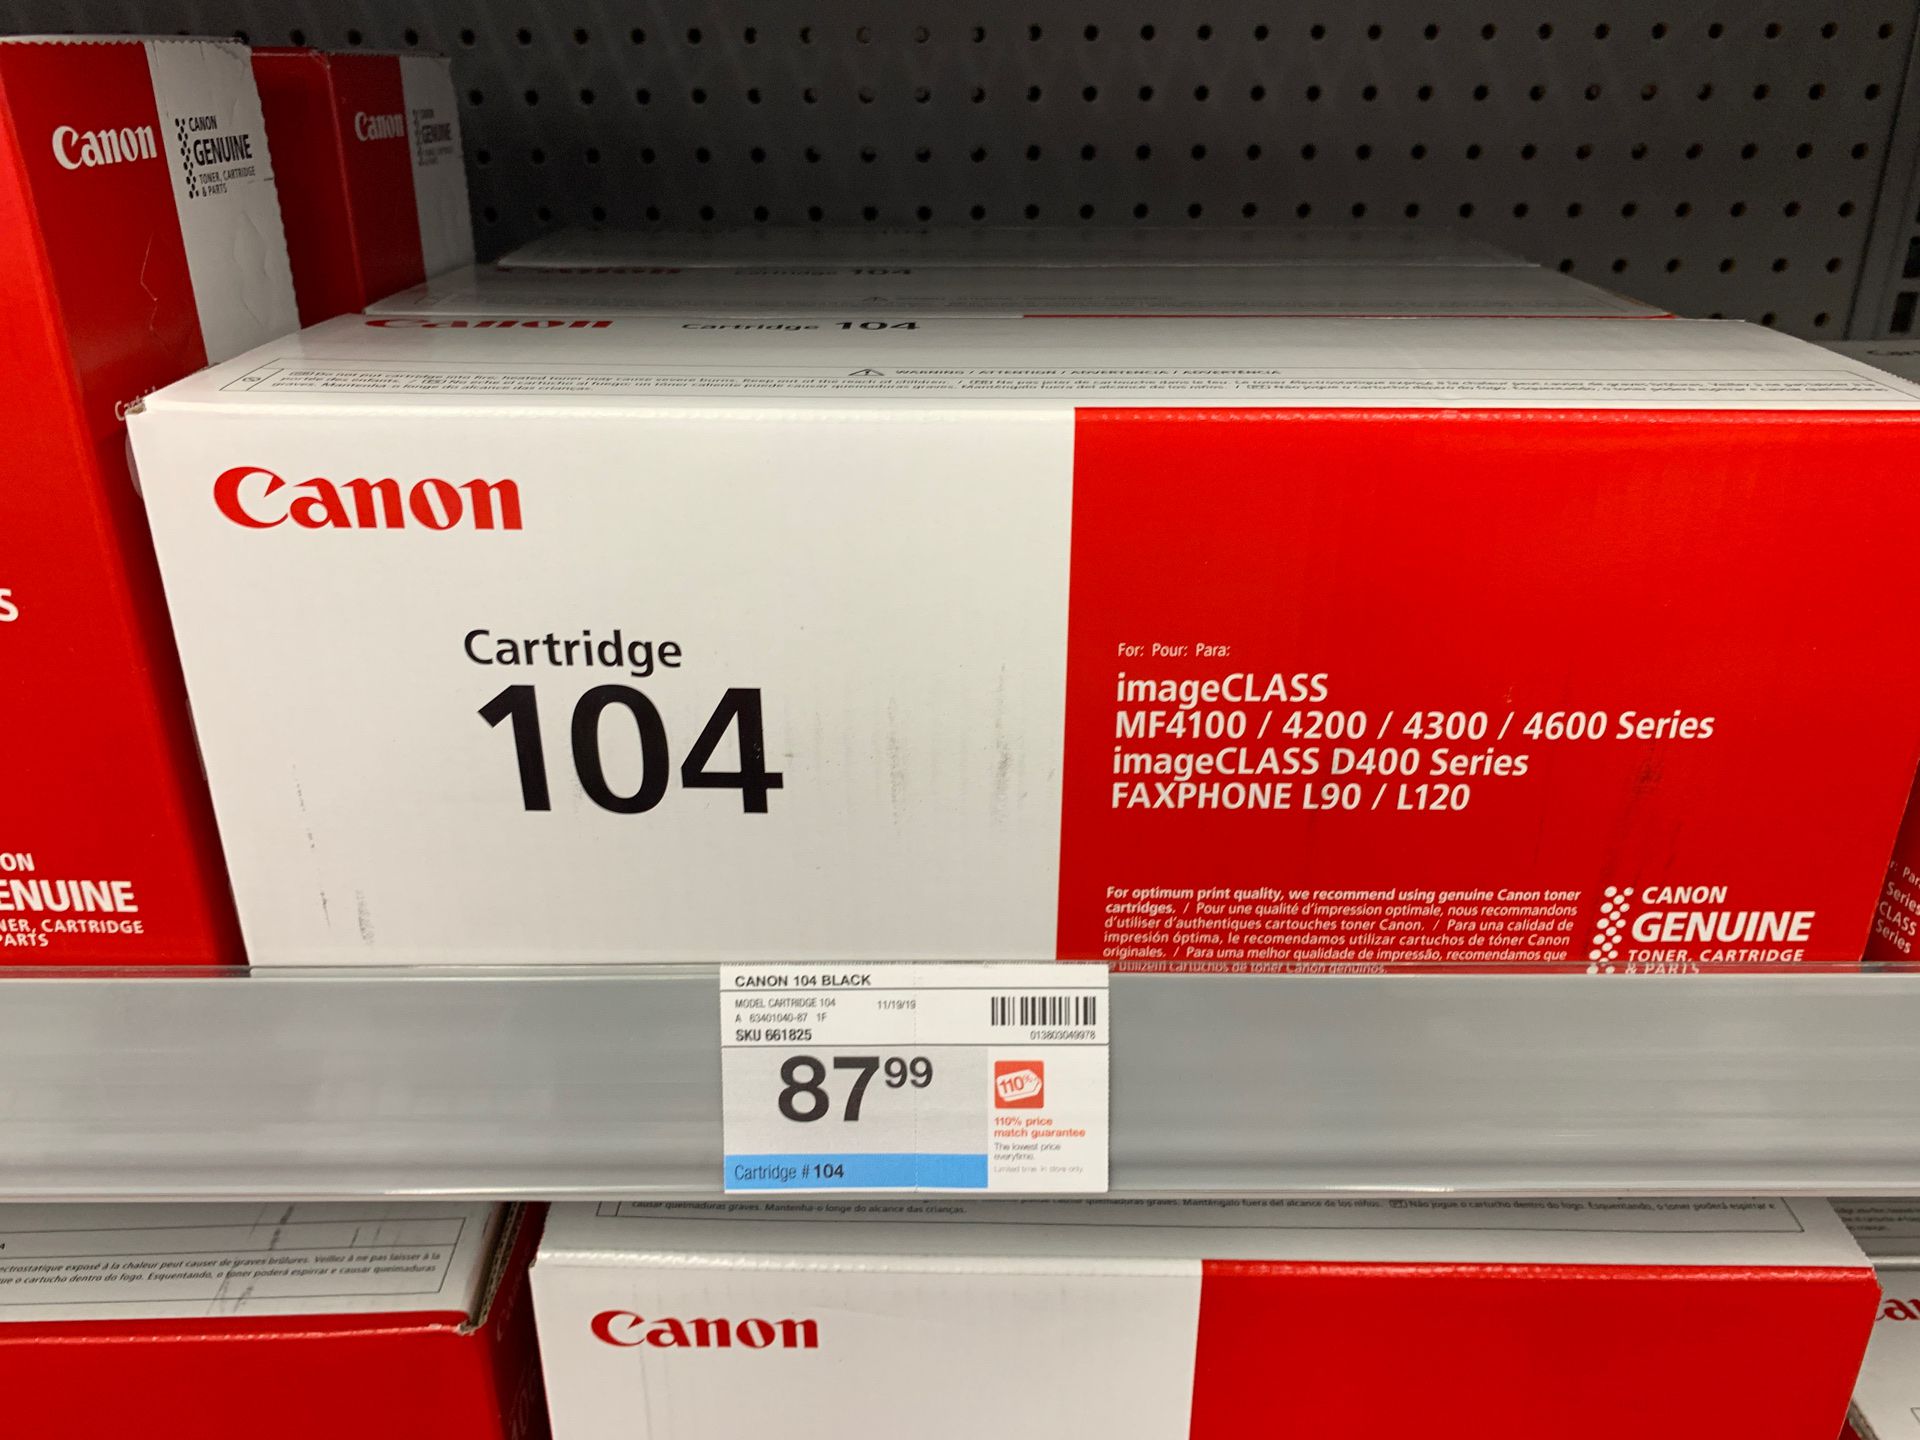 Canon cartridge 104 for image class